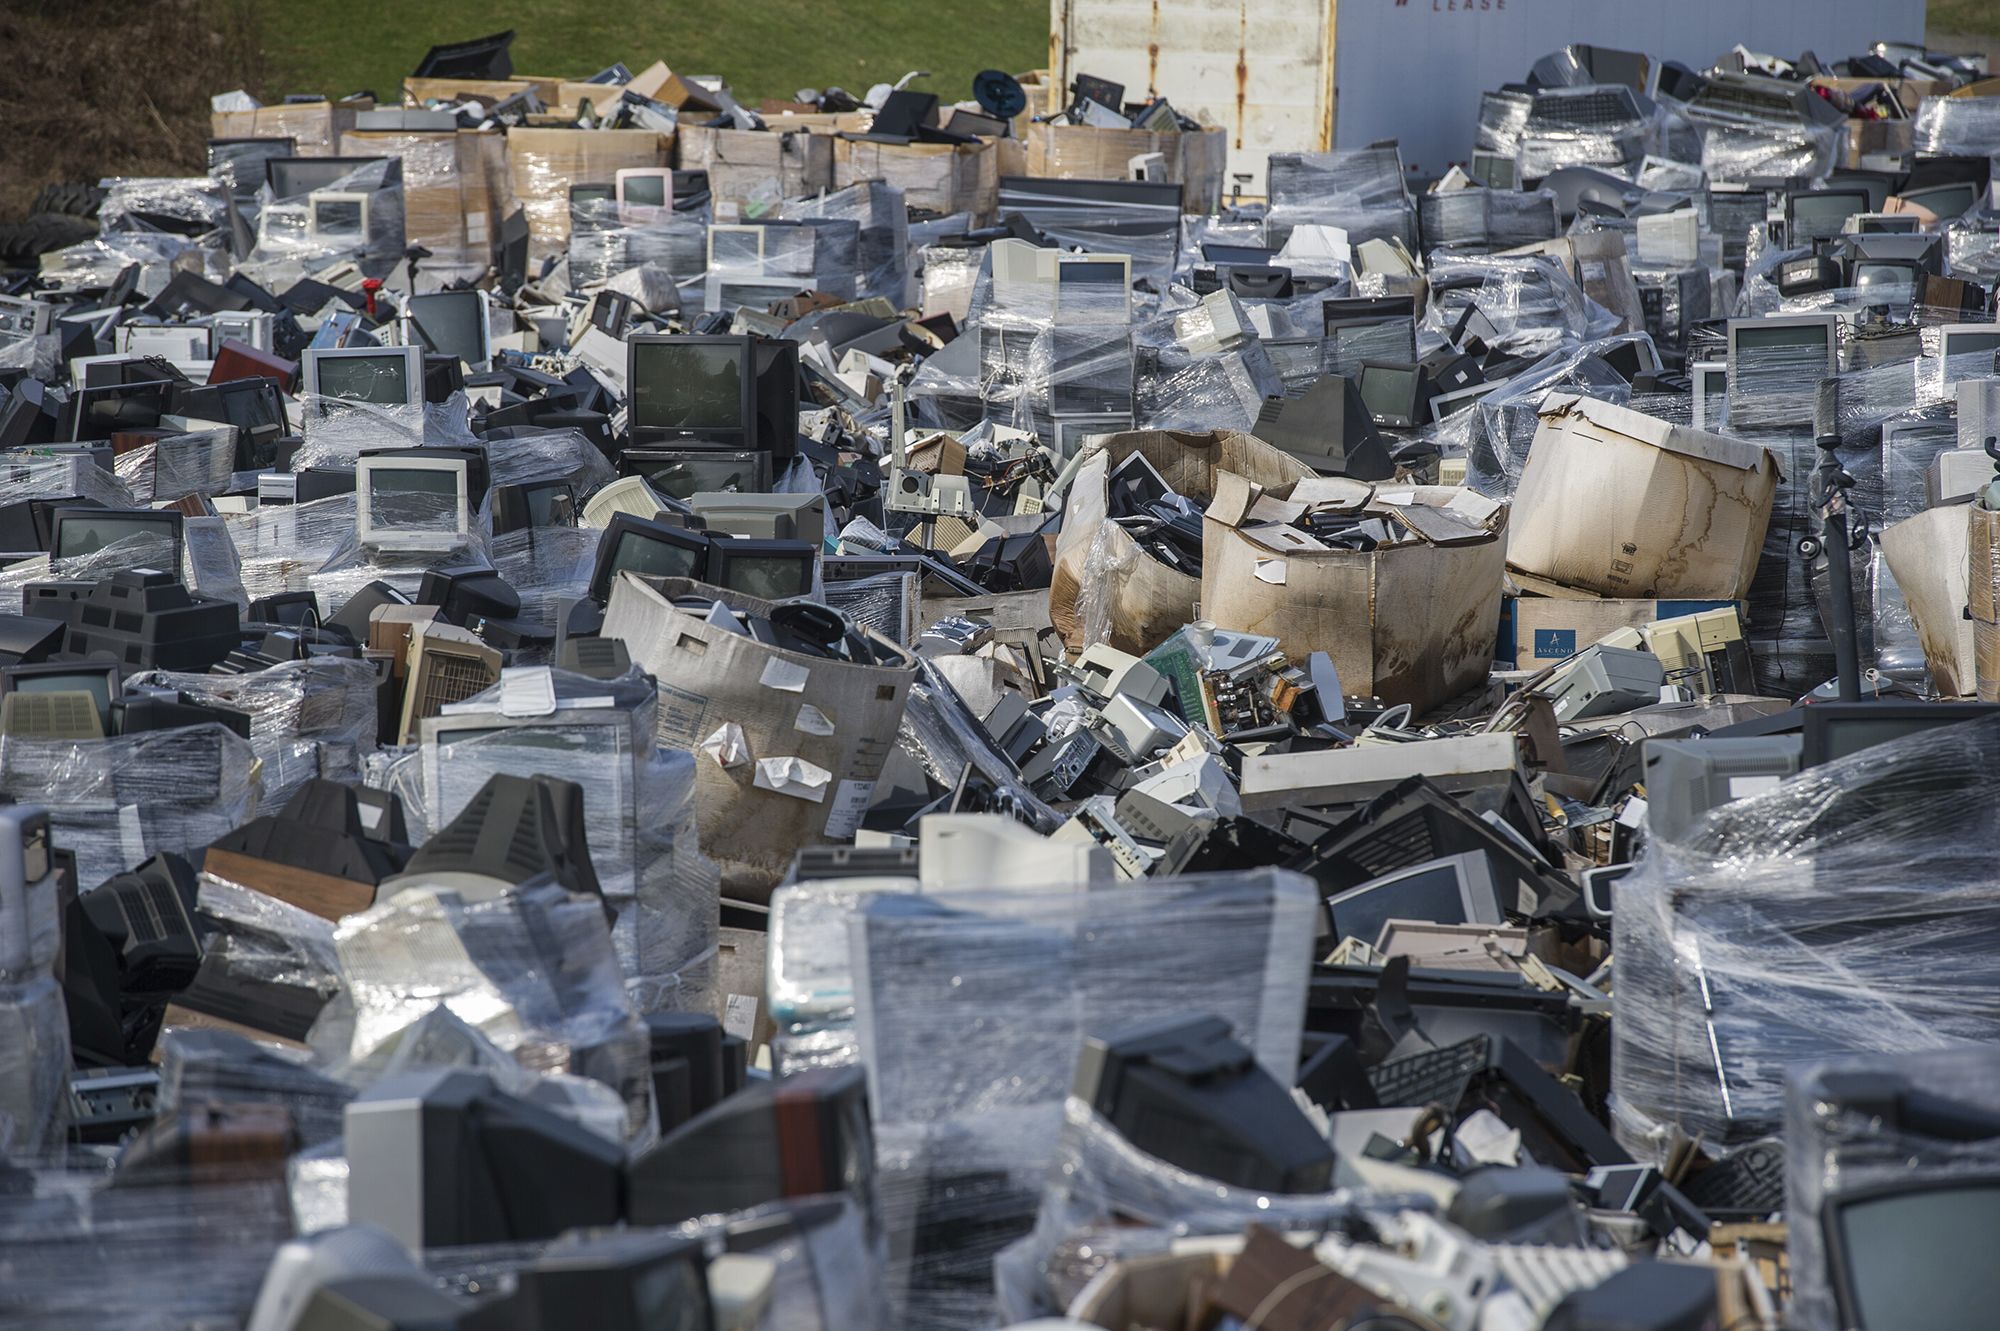 Ban on Batteries and Electronics in Garbage - Utilities